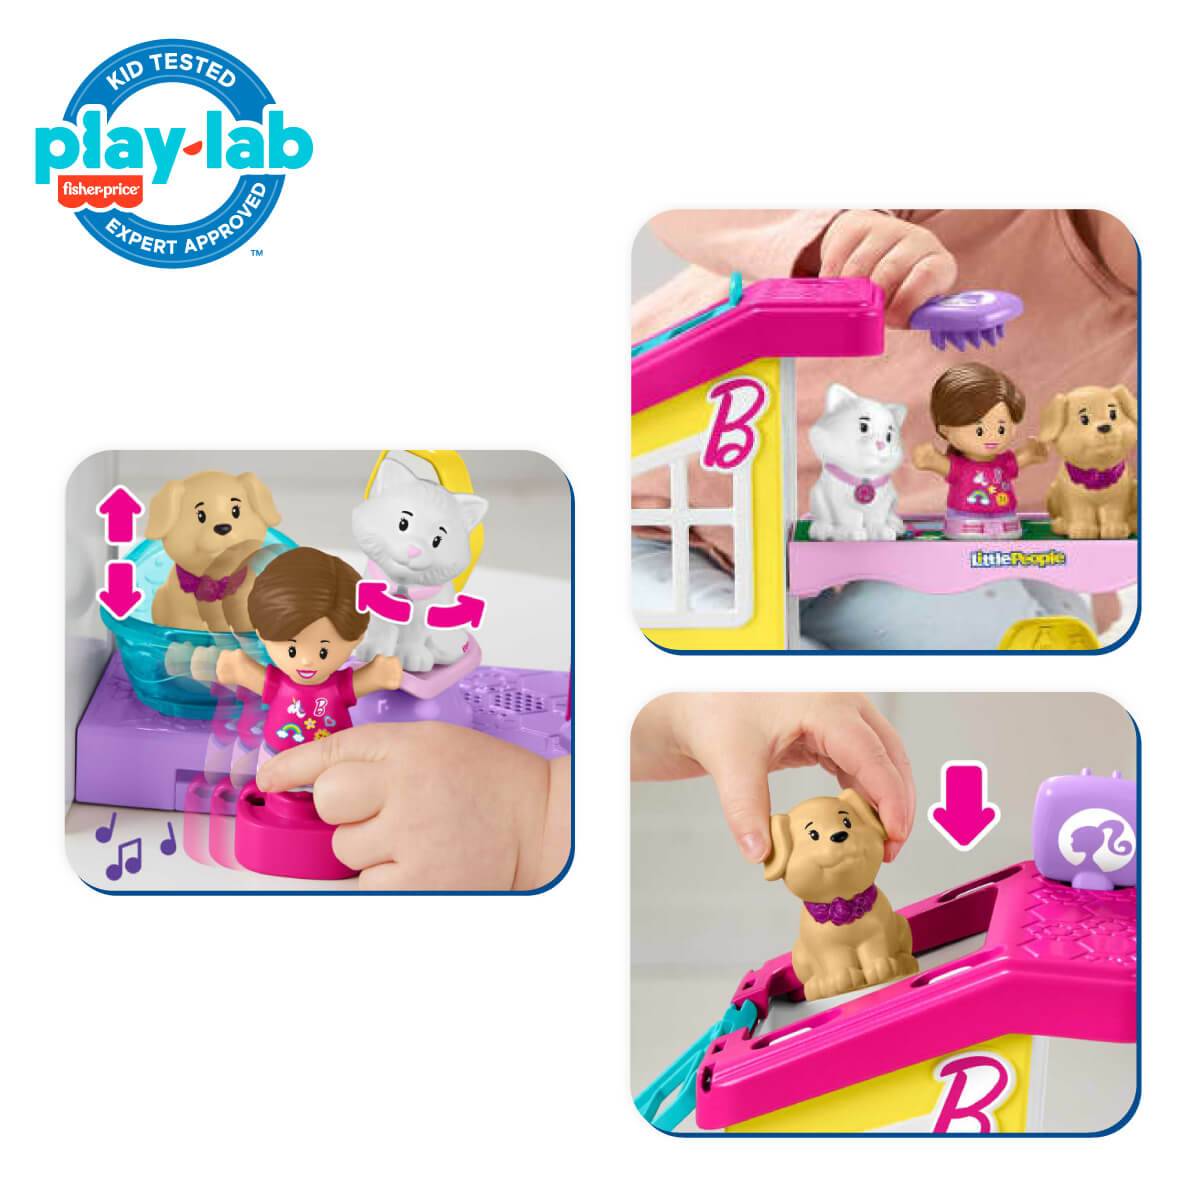 Barbie® Play and Care Pet Spa by Little People®